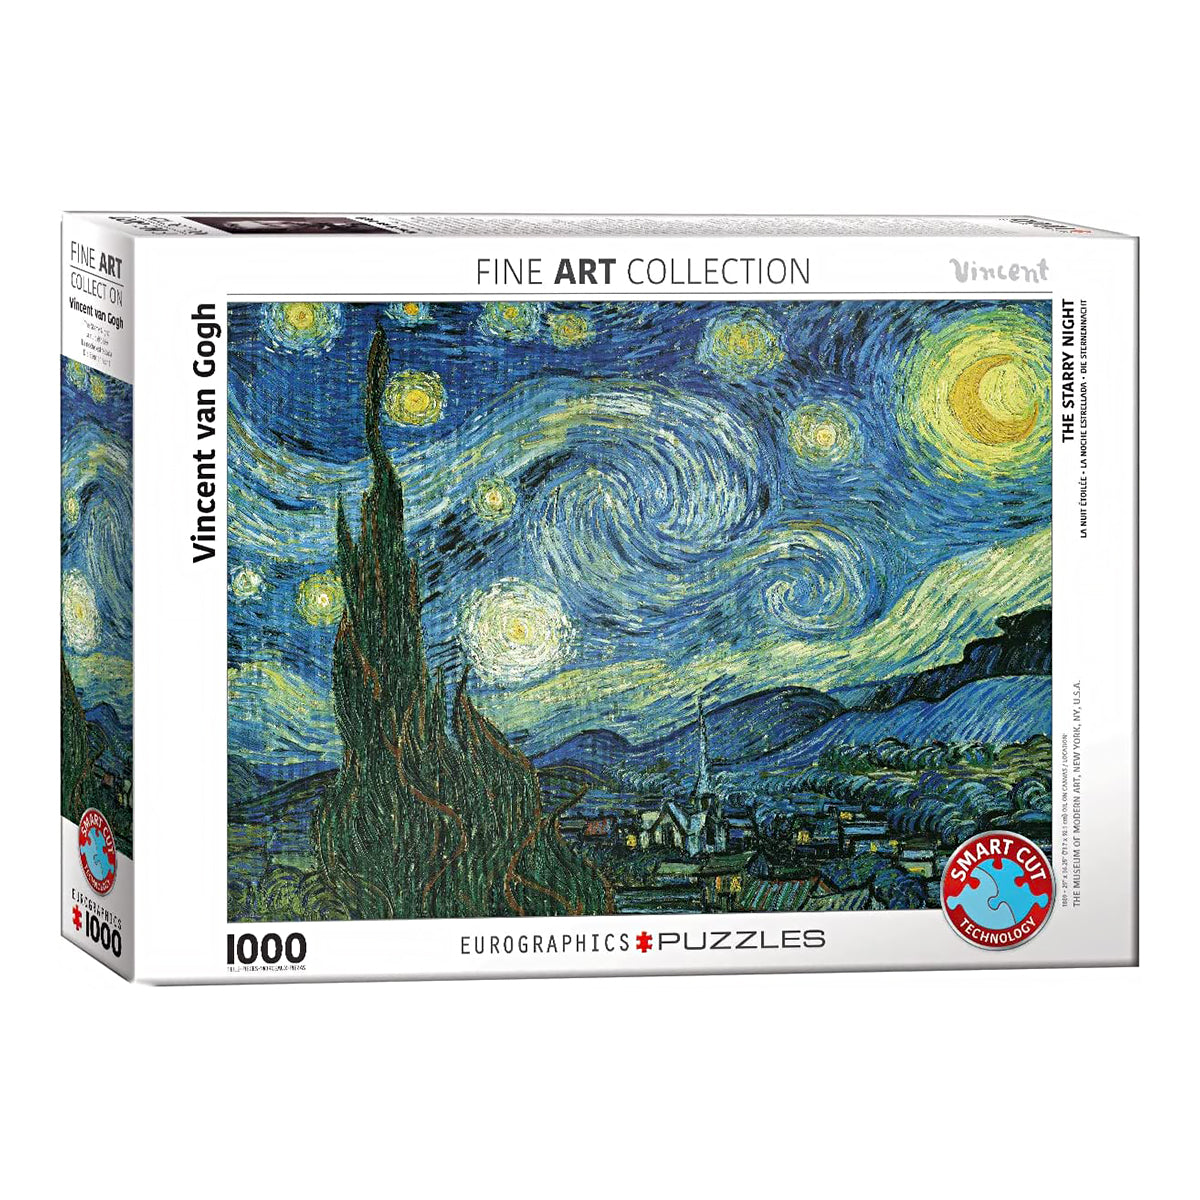 Can’t make it to the Museum of Modern Art in New York to see van Gogh’s “Starry Night” in person? This puzzle is your next best bet as you can piece together a copy of the world-famous painting.